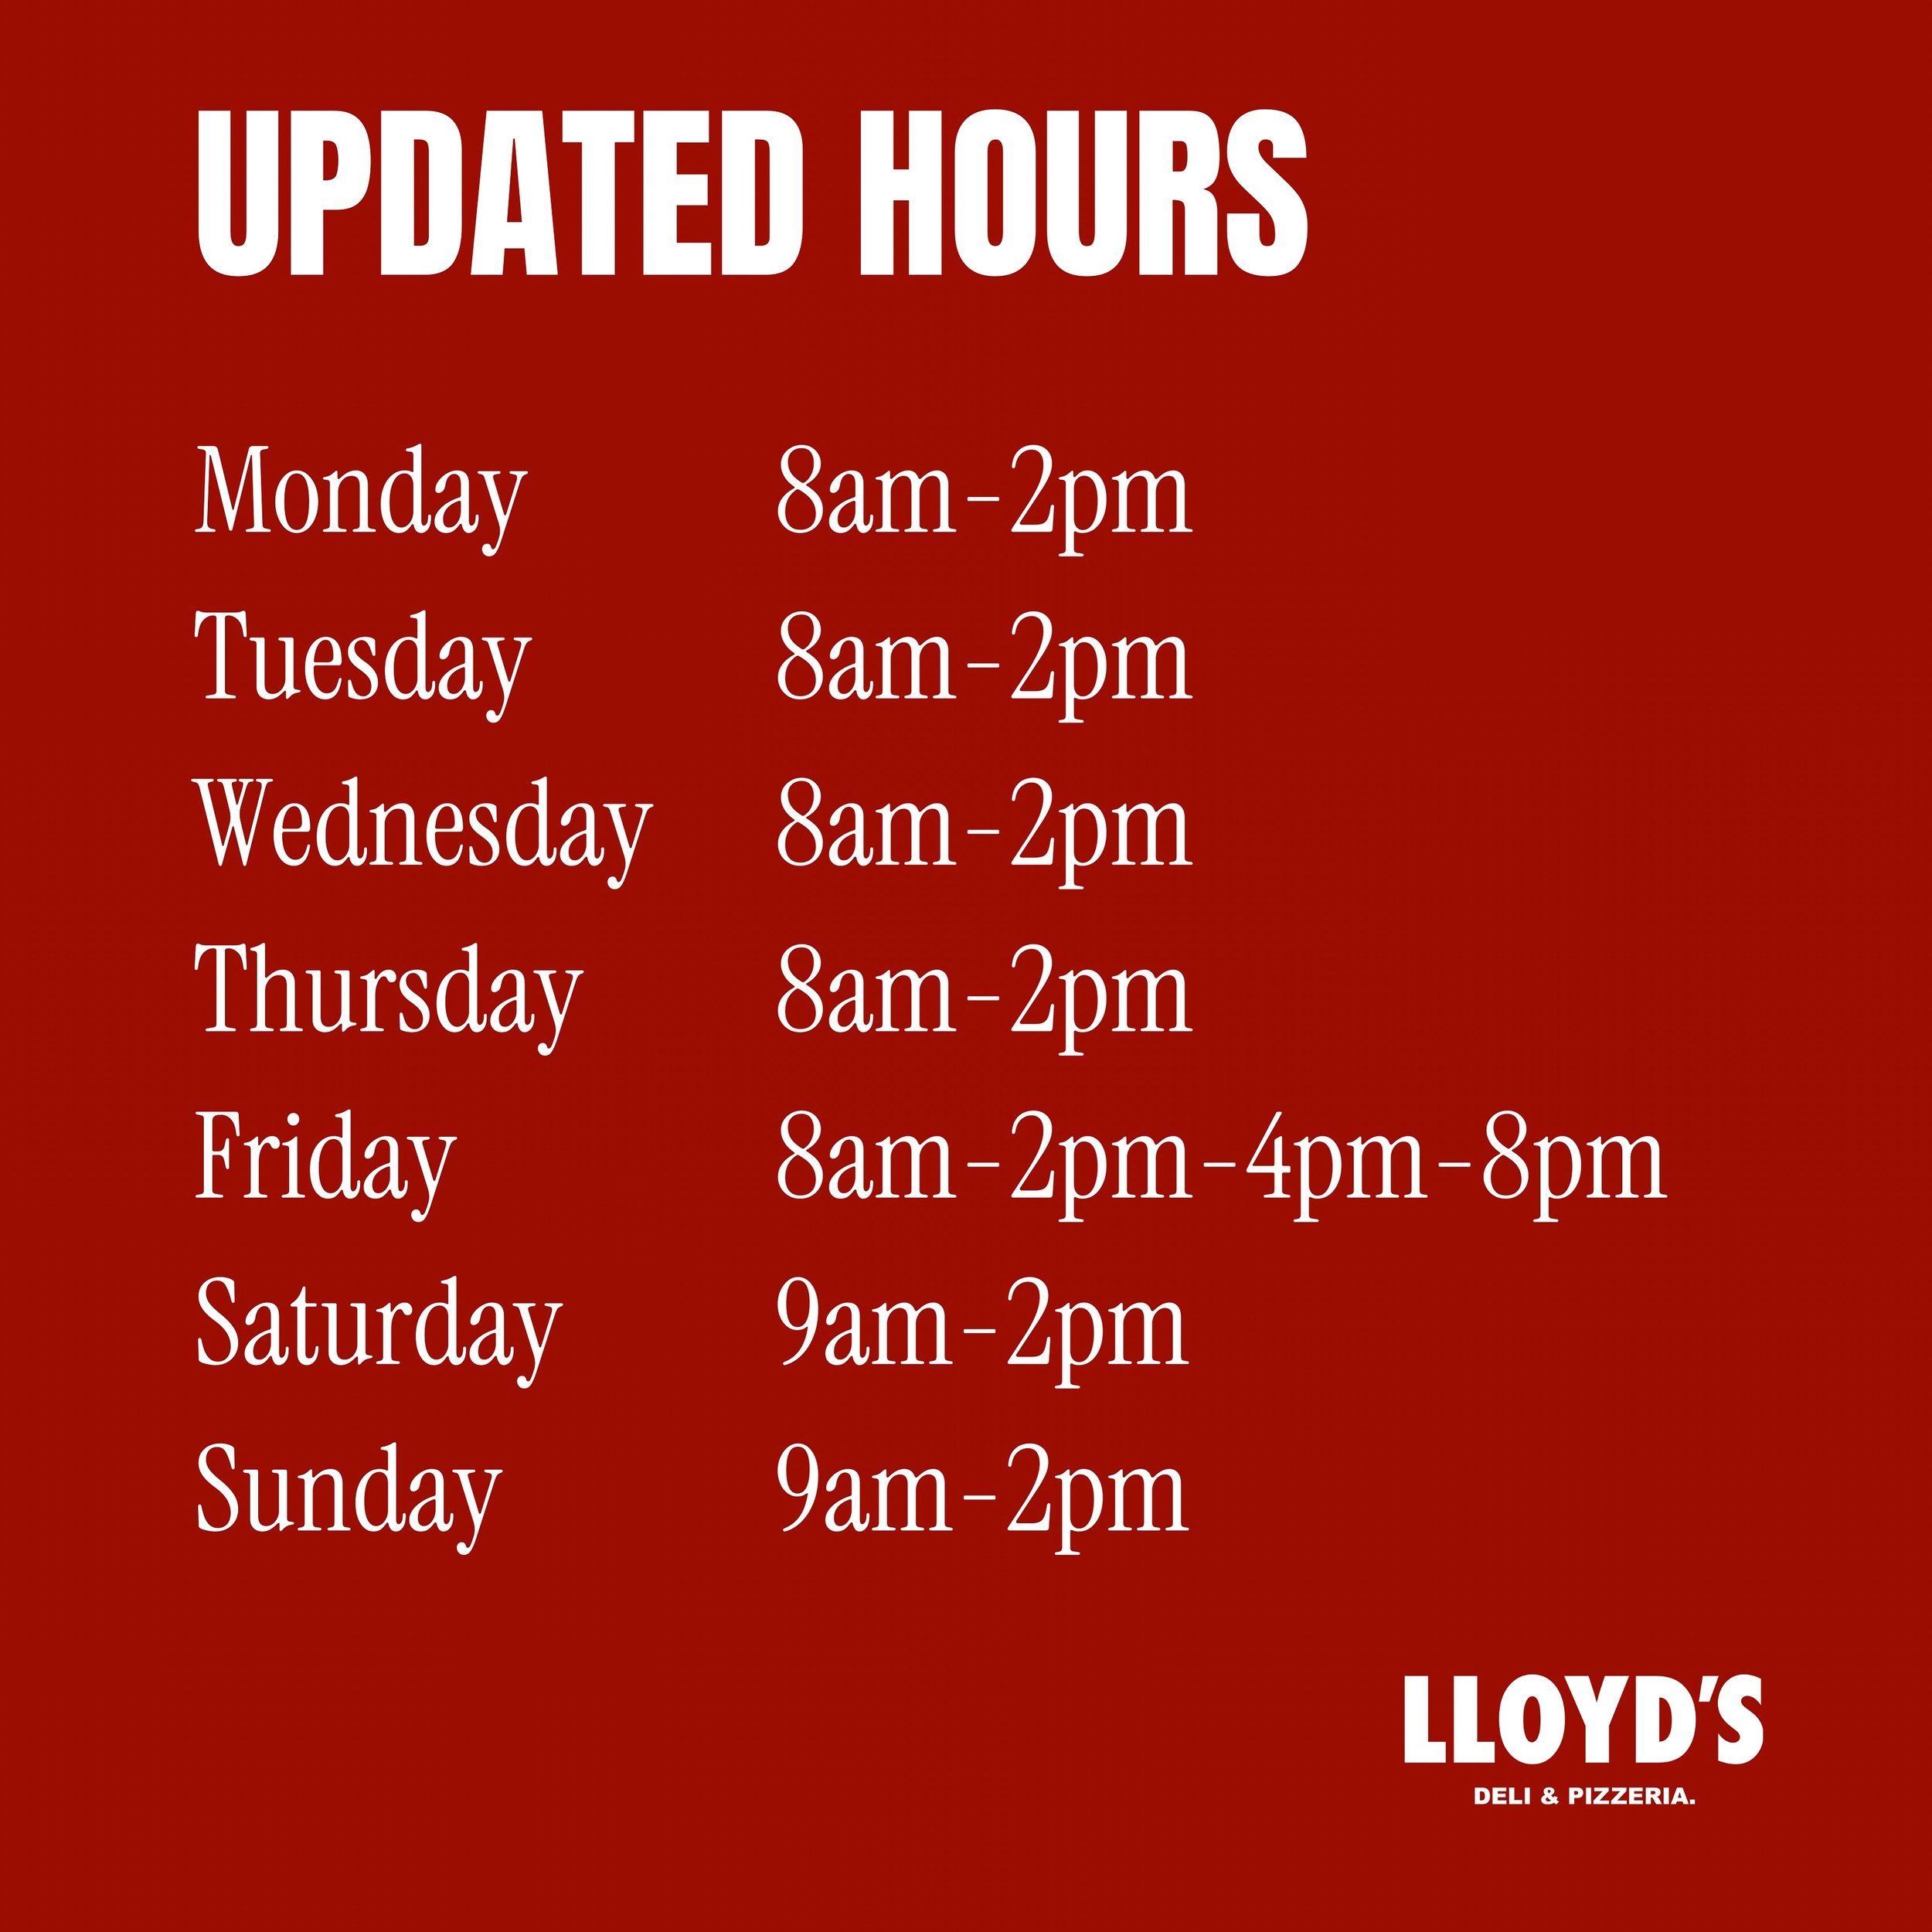 Updated hours 🙏🏼